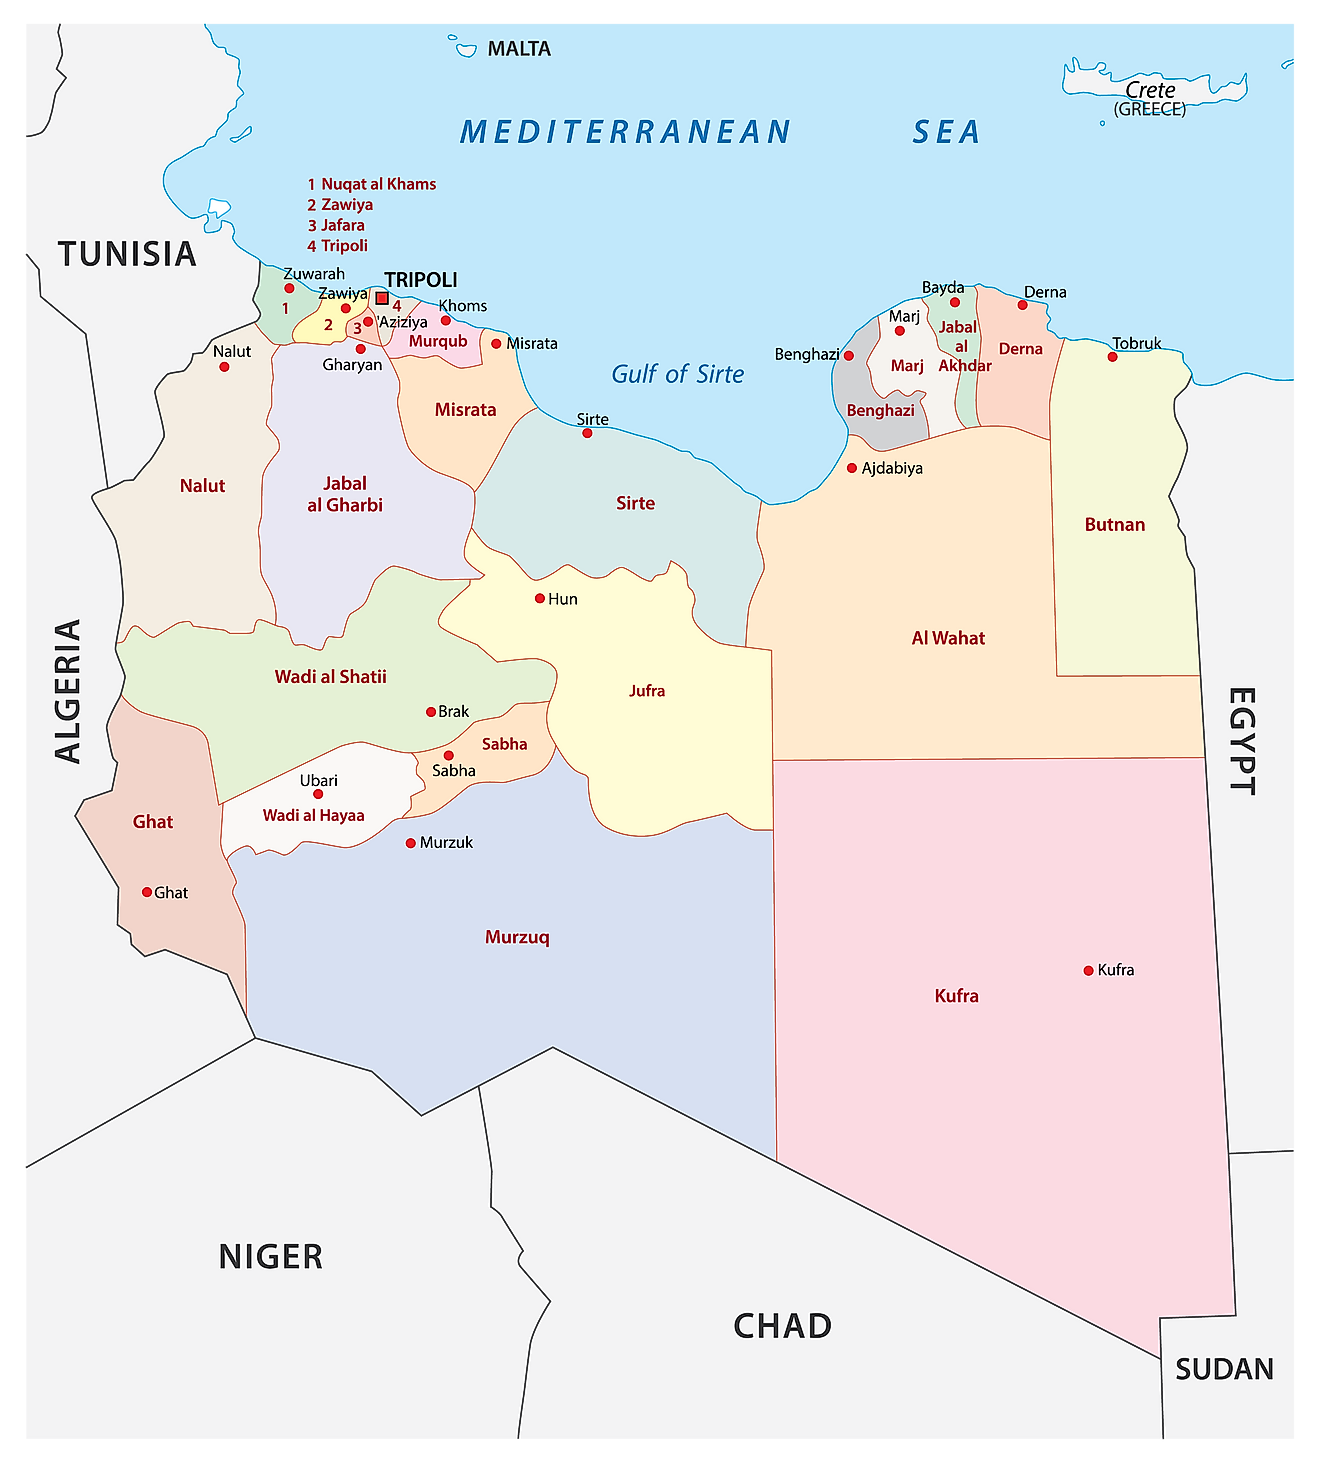 Political map of Libya showing its 22 governorates and the national capital, Tripoli.